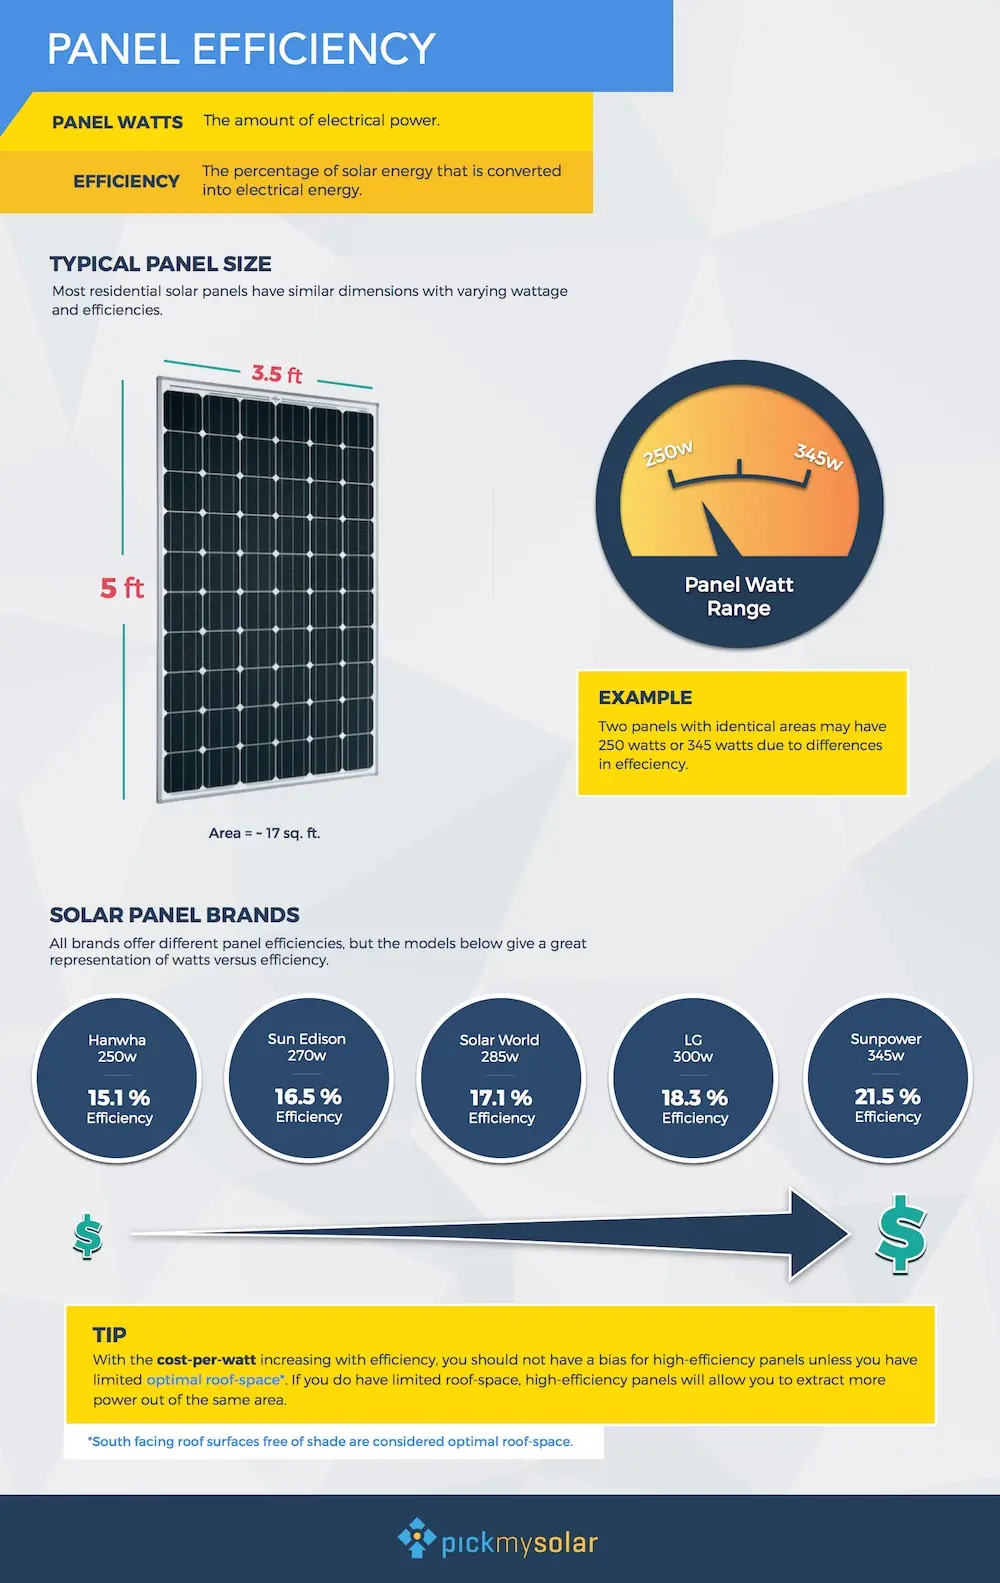 does type of solar panel matter - Do some solar panels work better than others